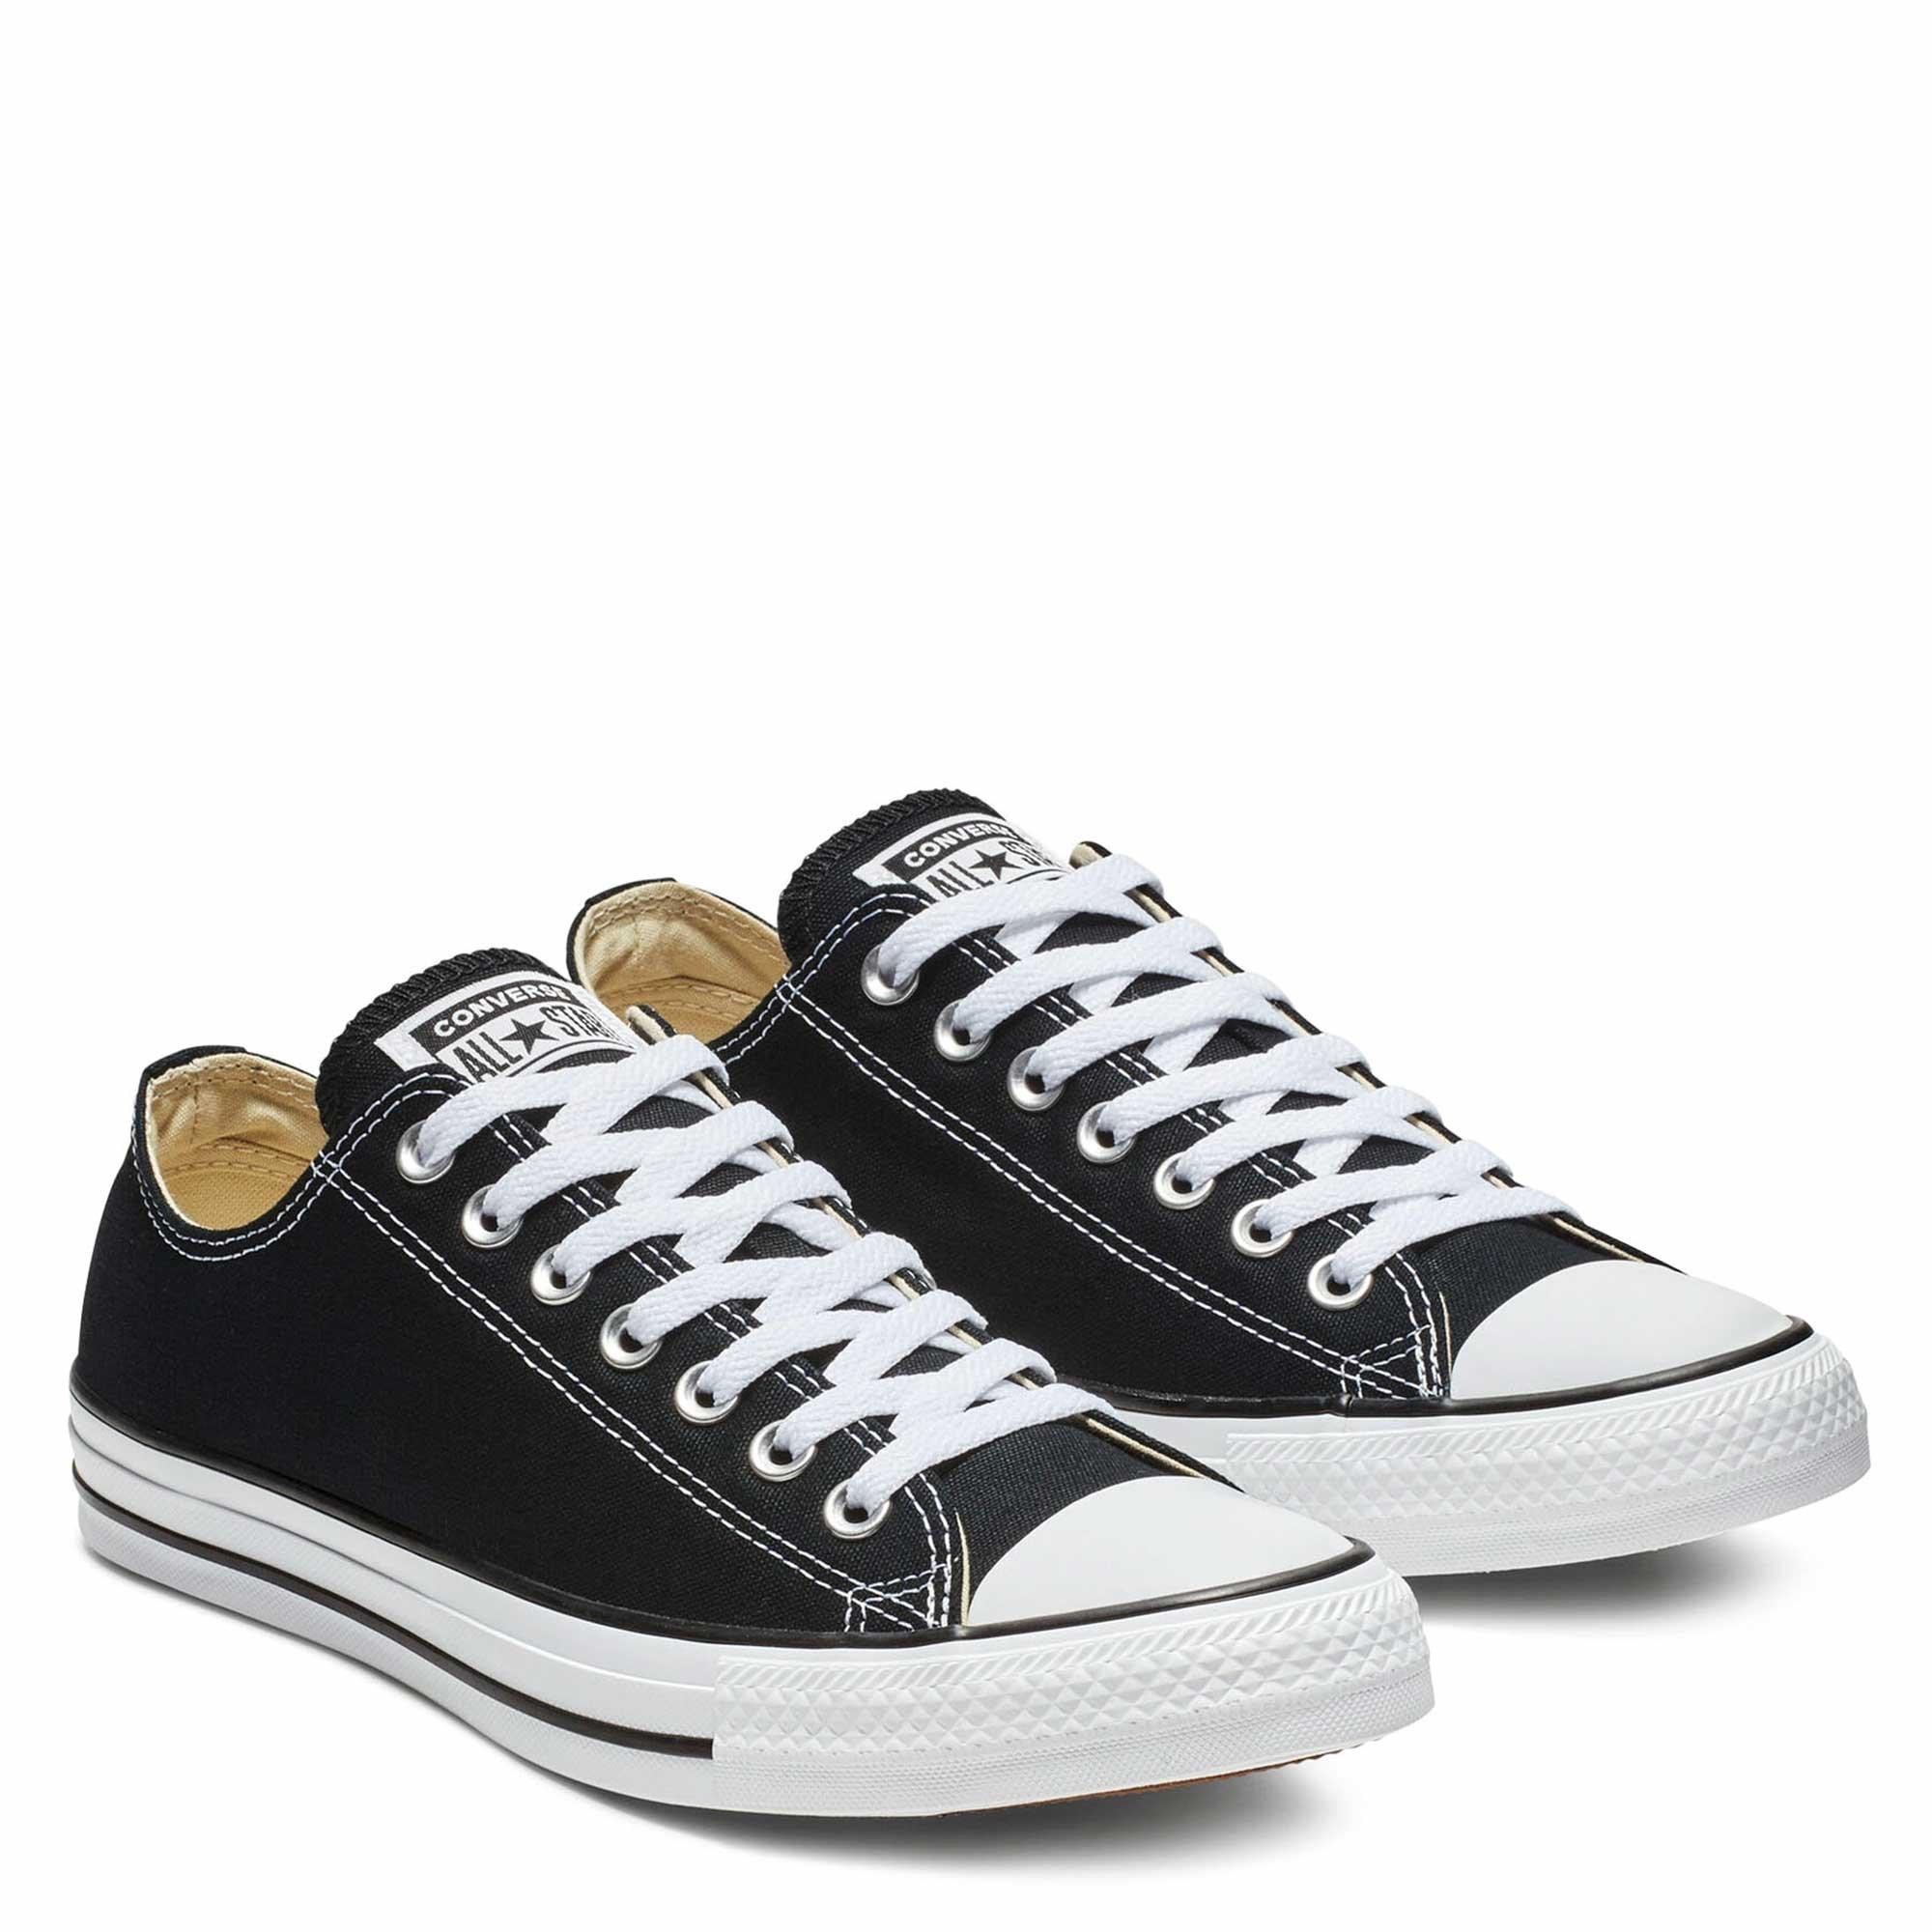 Converse | Chuck Taylor All Star Classic Mens Shoes | Canvas Low ...